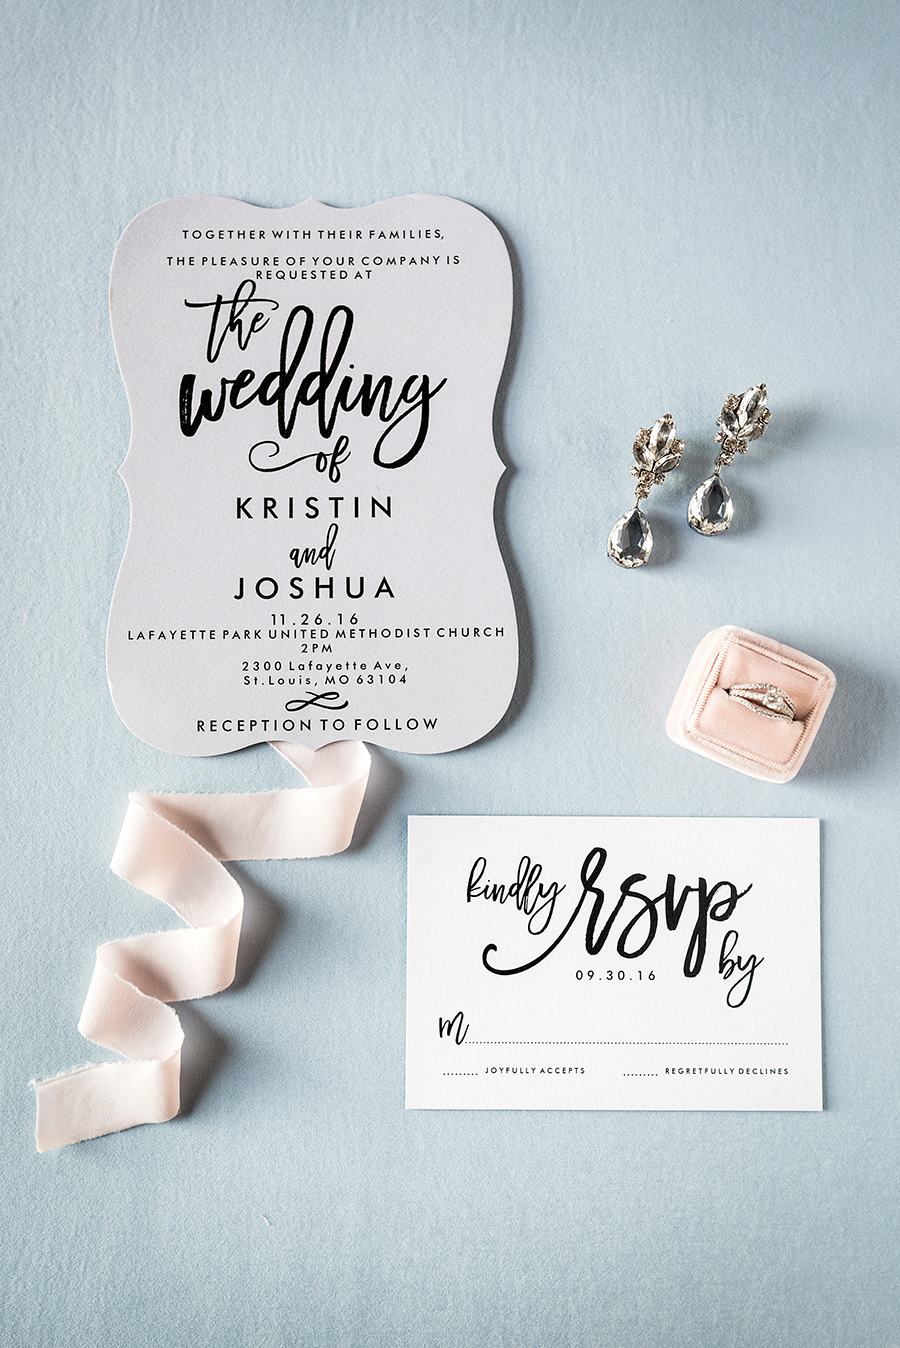 wedding invitation suite in top 10 tips for wedding planning post by ashley fisher photography